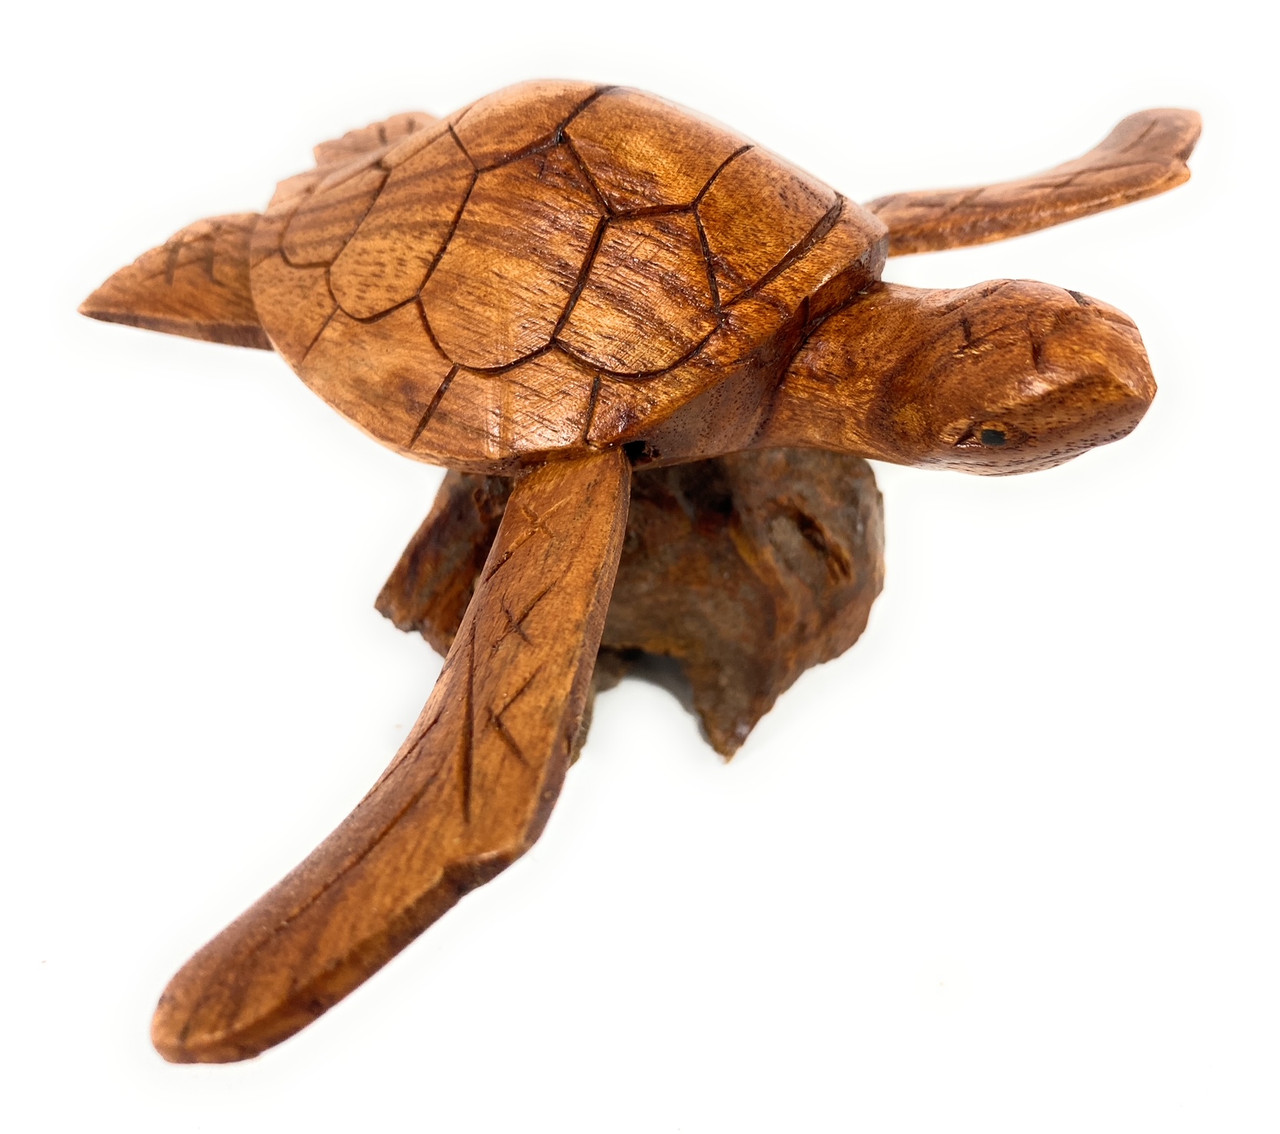 15+ Hand Carved Wooden Turtle